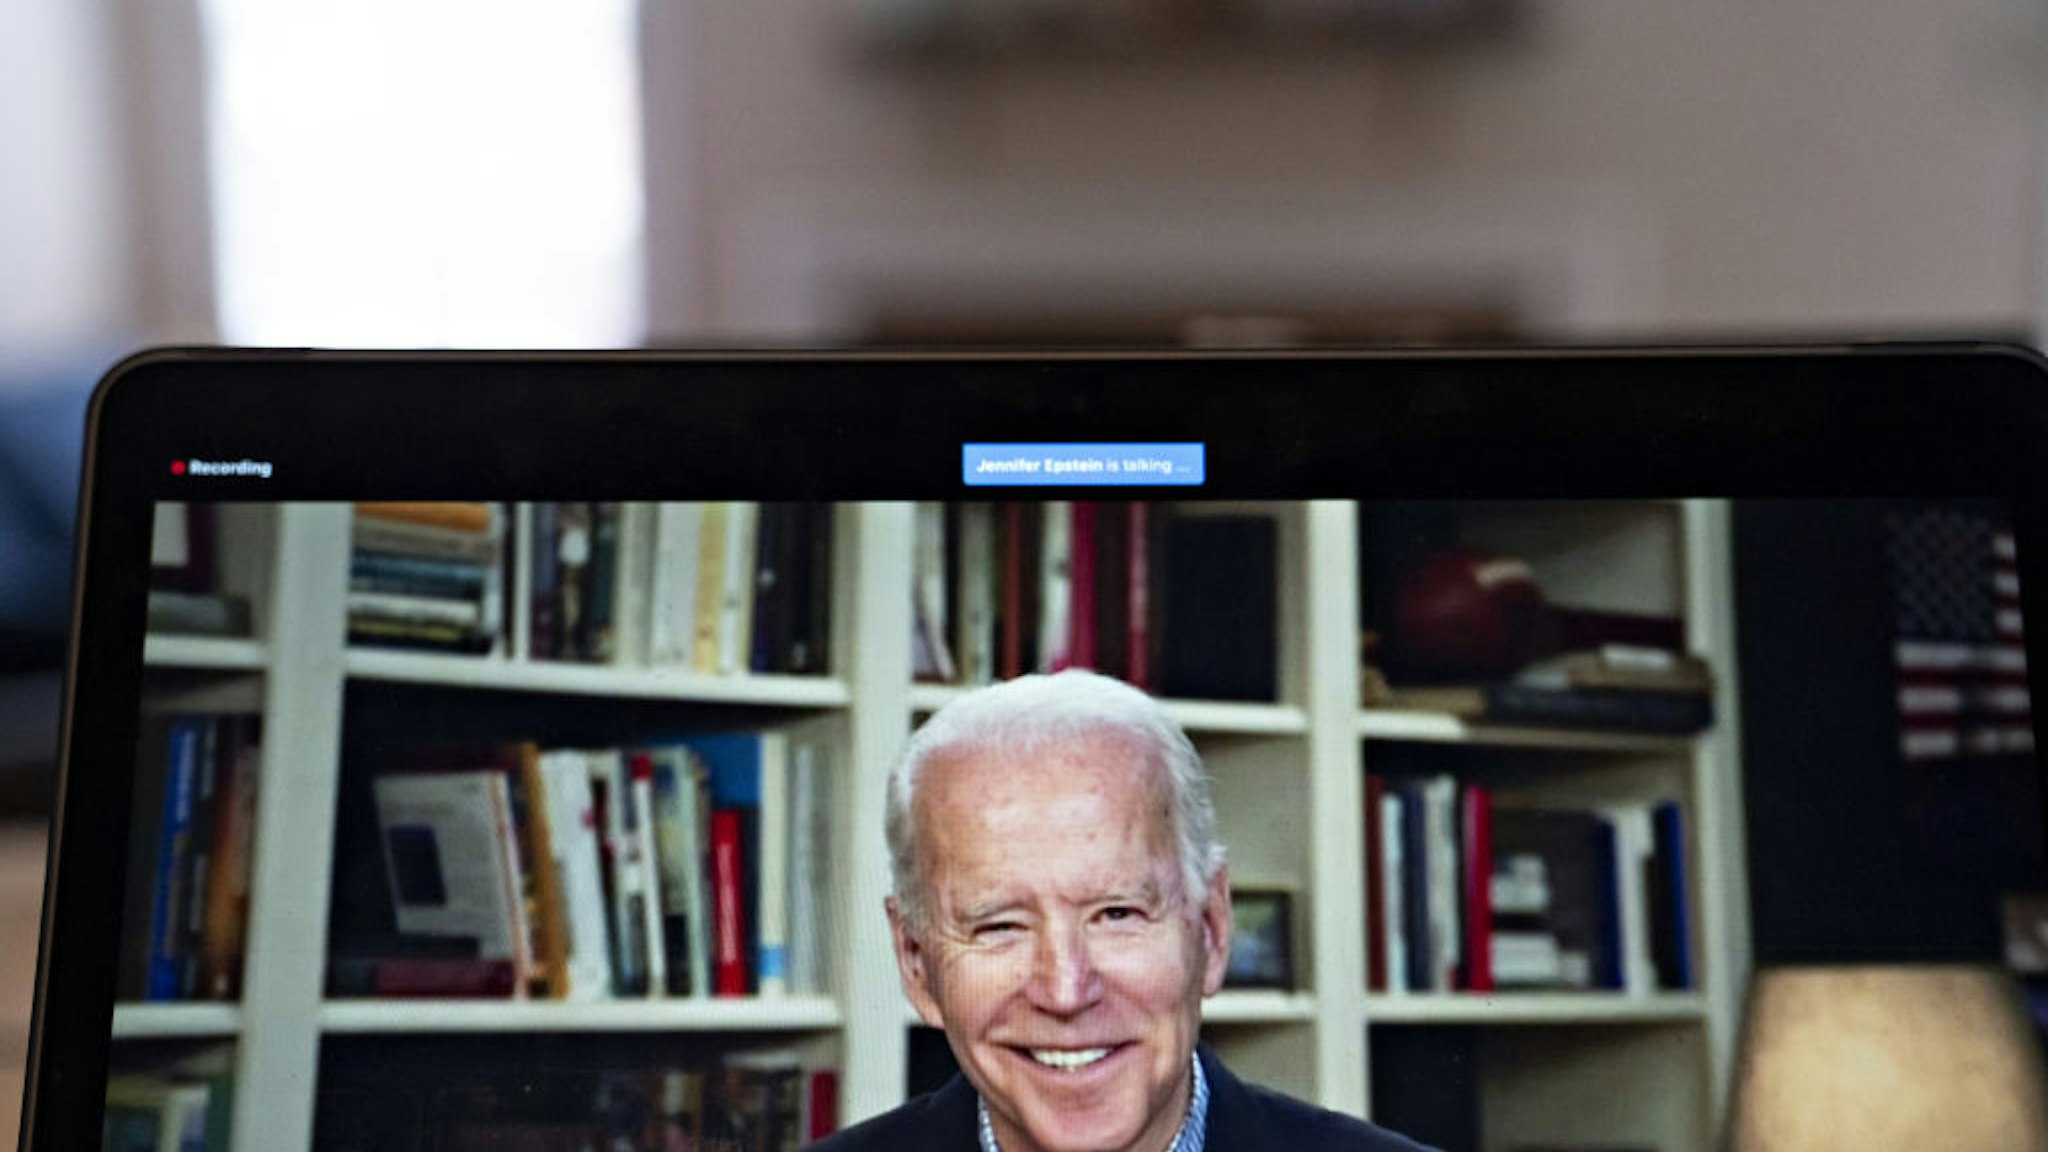 Former Vice President Joe Biden, 2020 Democratic presidential candidate, smiles during a virtual press briefing on a laptop computer in this arranged photograph in Arlington, Virginia, U.S., on Wednesday, March 25, 2020.